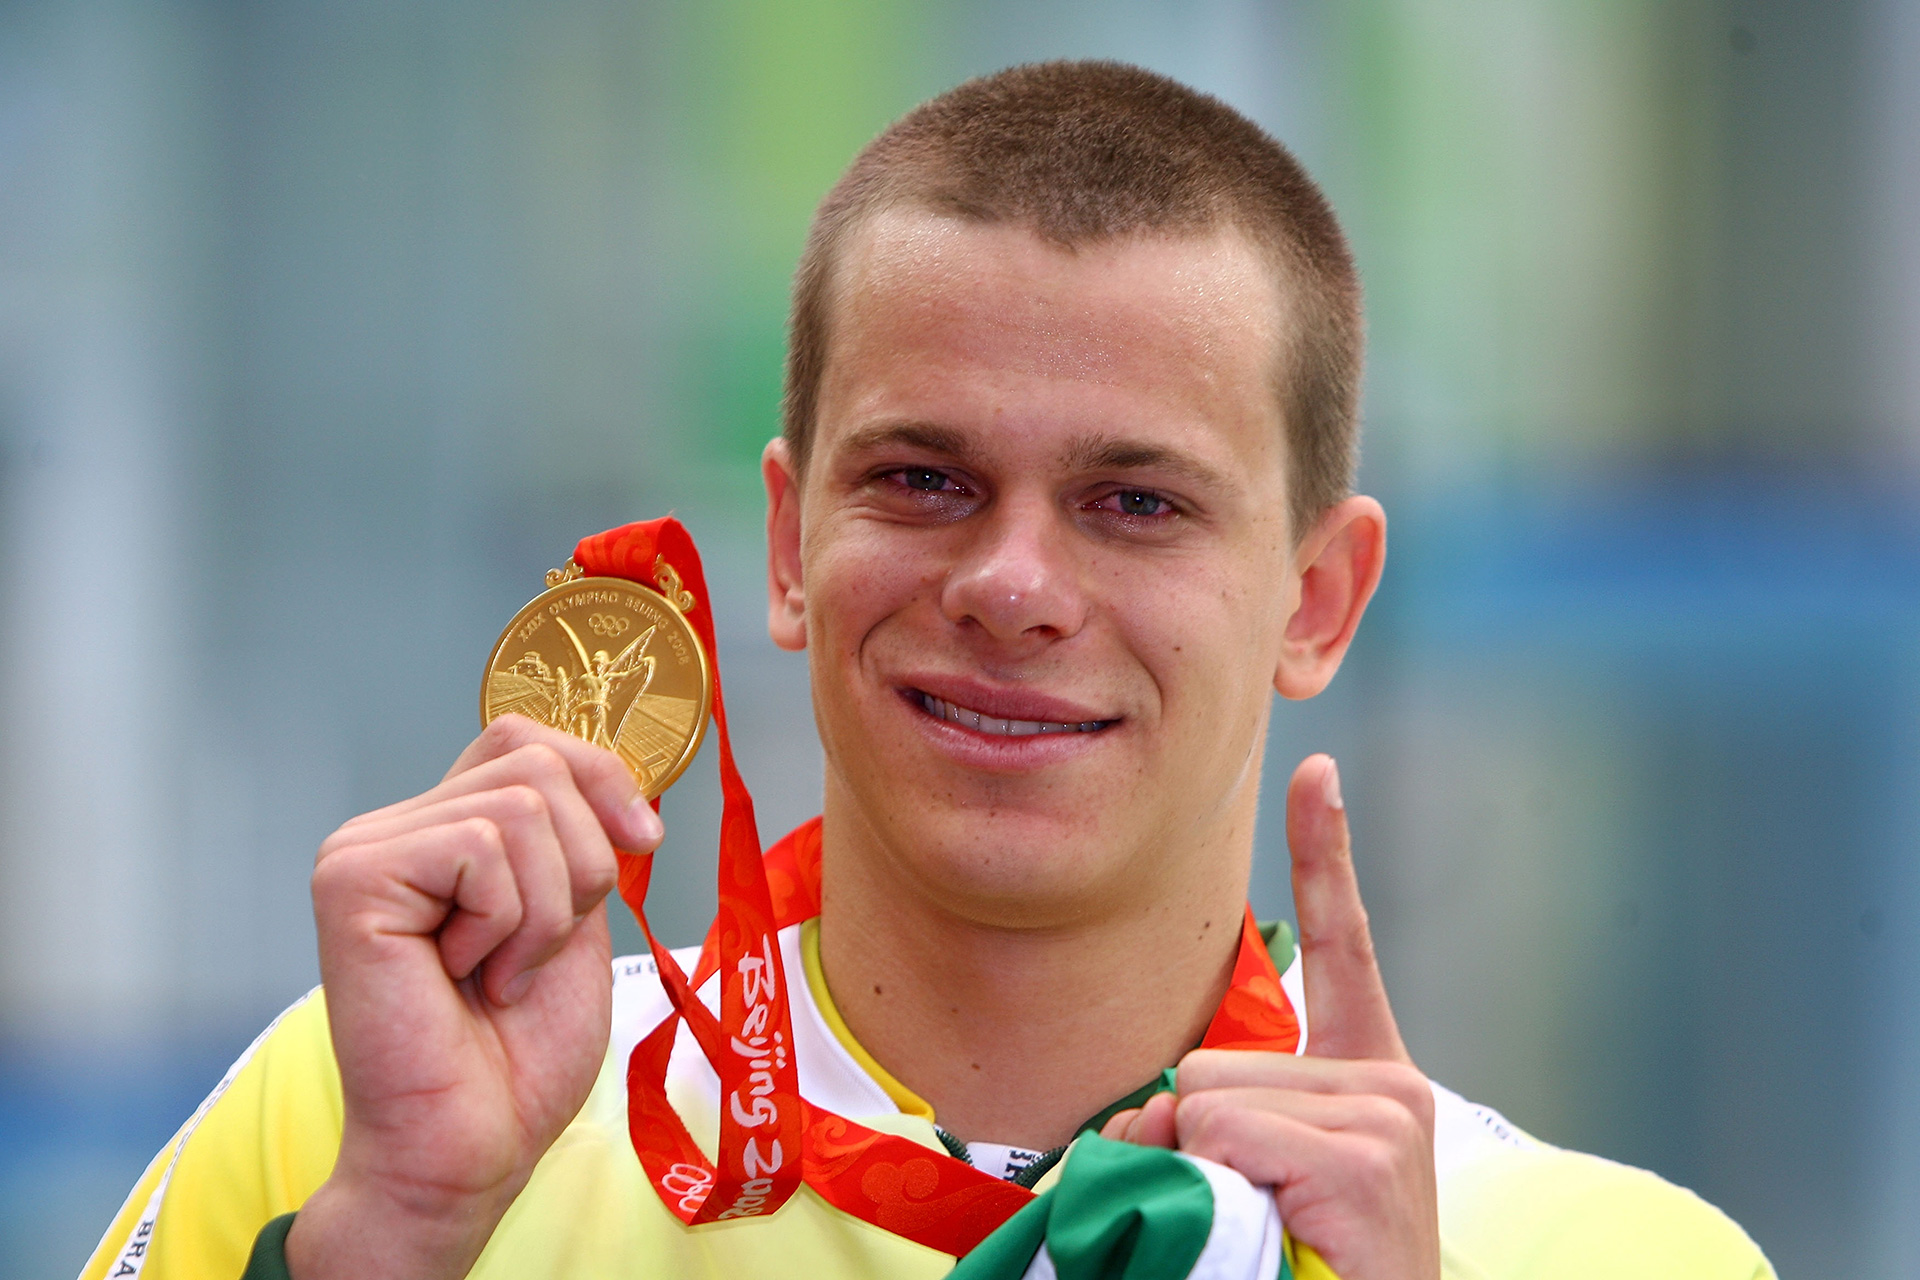 Cesar Cielo won the gold medal in Beijing 2008 in the 50-meter race at the National Aquatics Center.